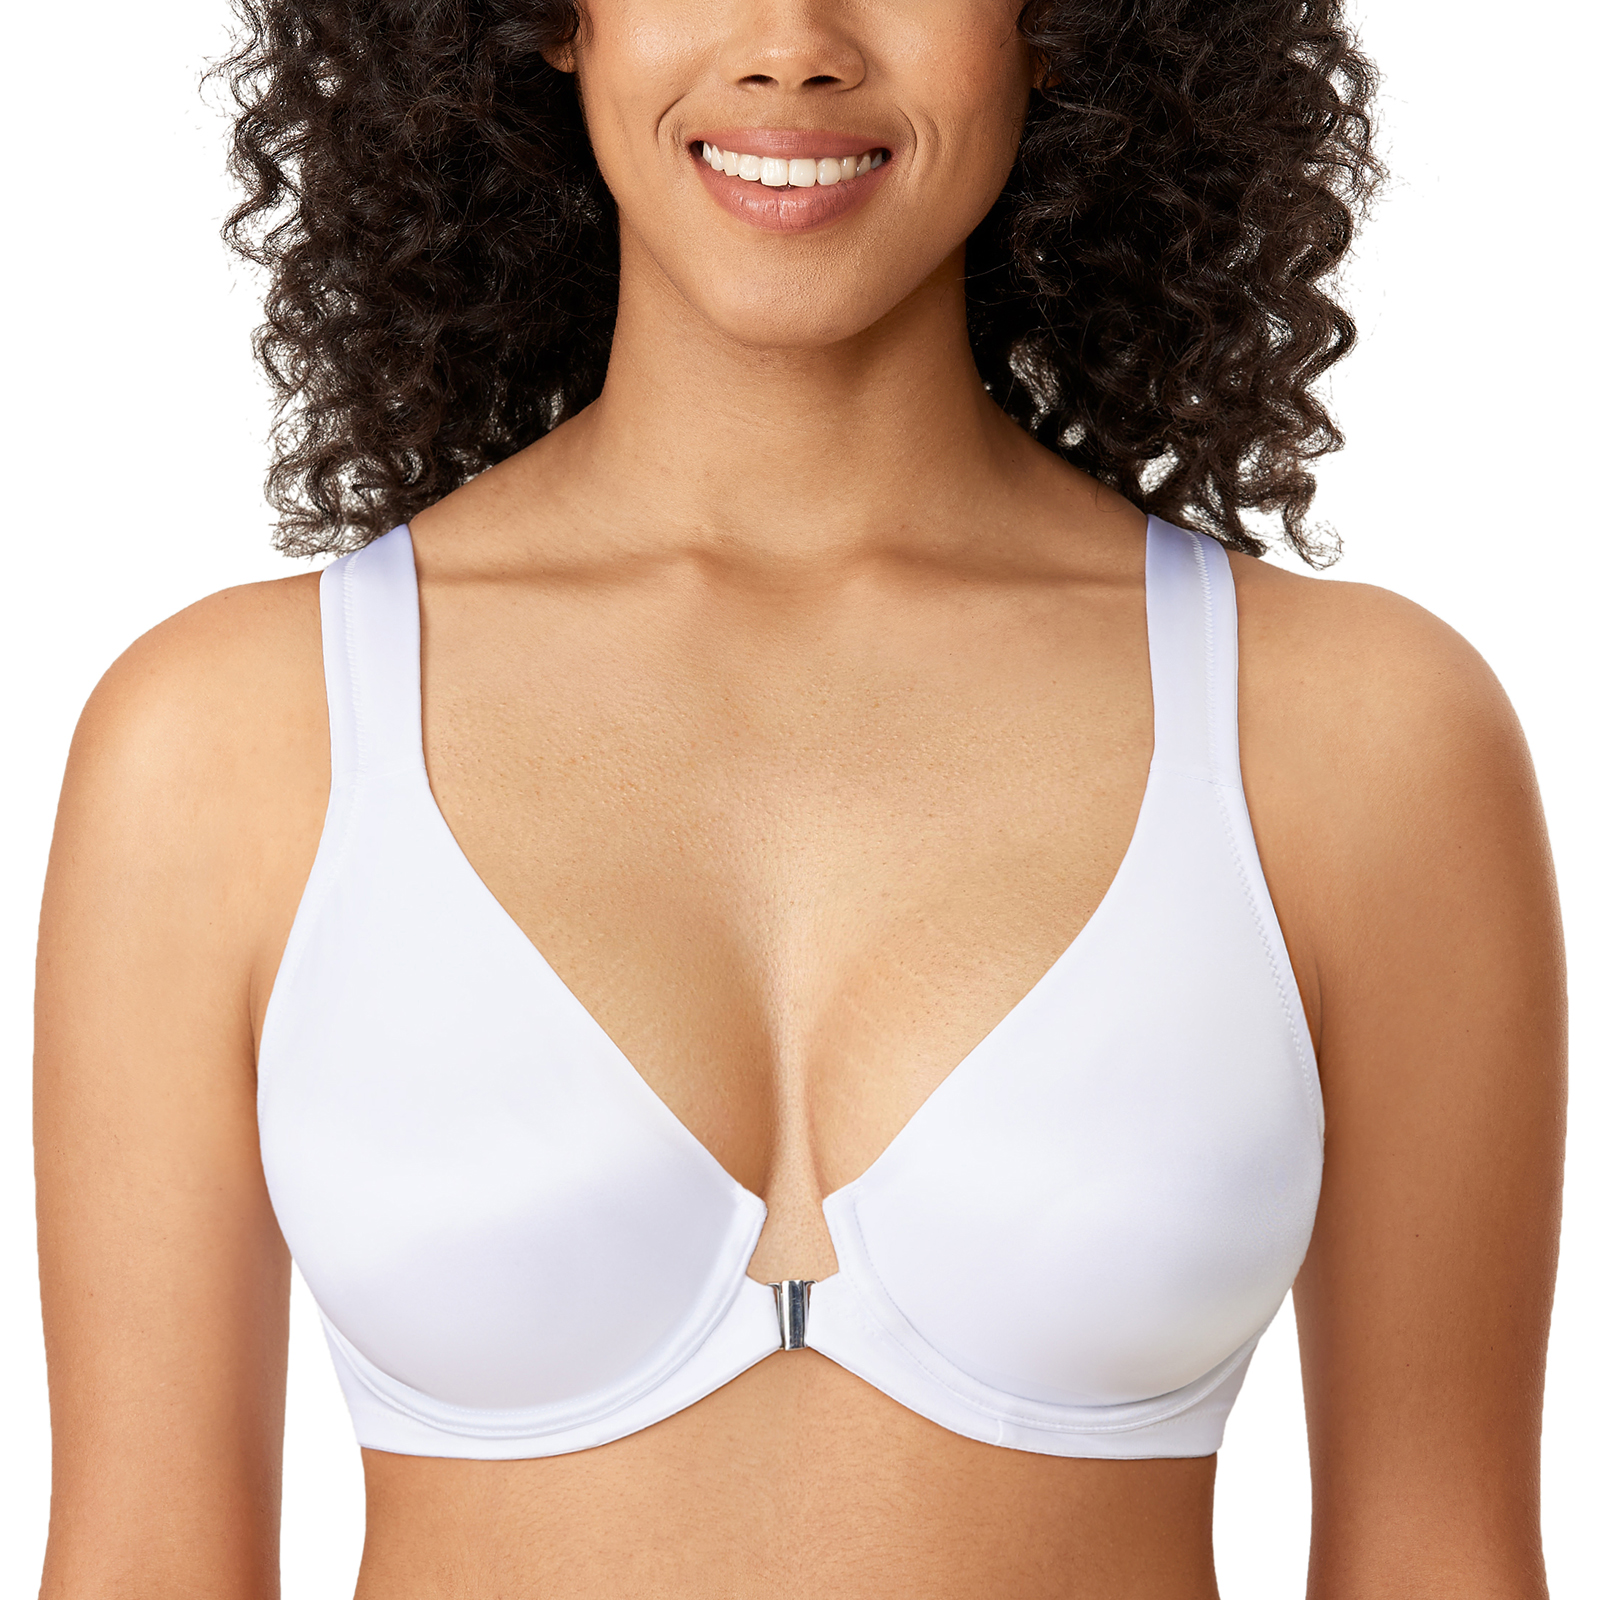 Delimira Women's Full Coverage Smooth Seamless Invisible Underwire